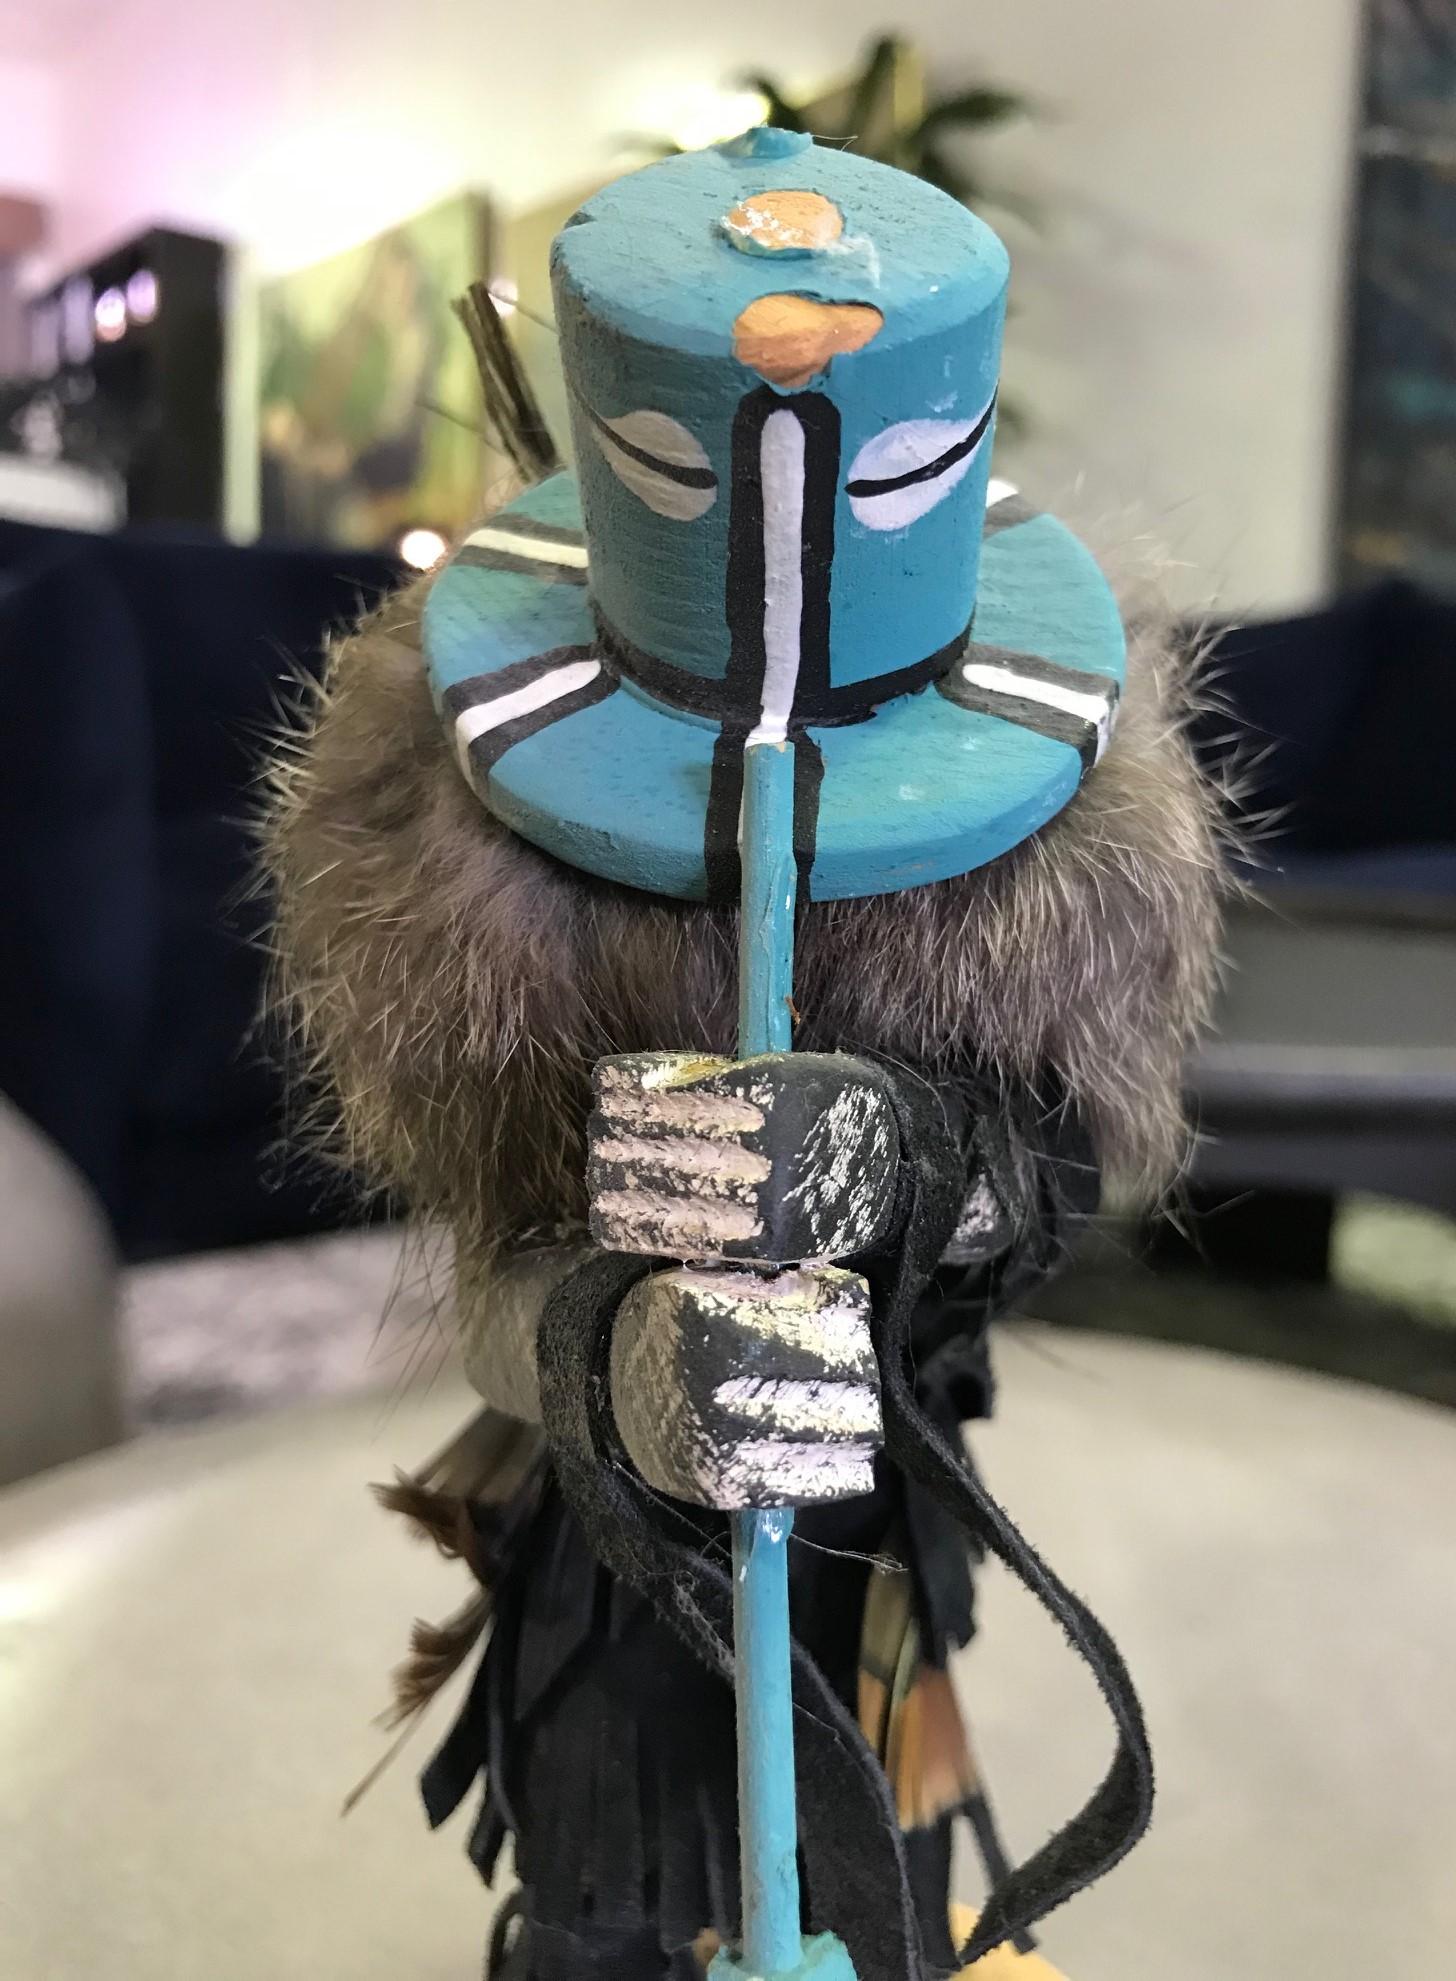 A wonderfully detailed and decorated Kachina doll.

Signed by the artist on the base.

From a collection of Native American objects and artifacts.

Dimensions: 7.75